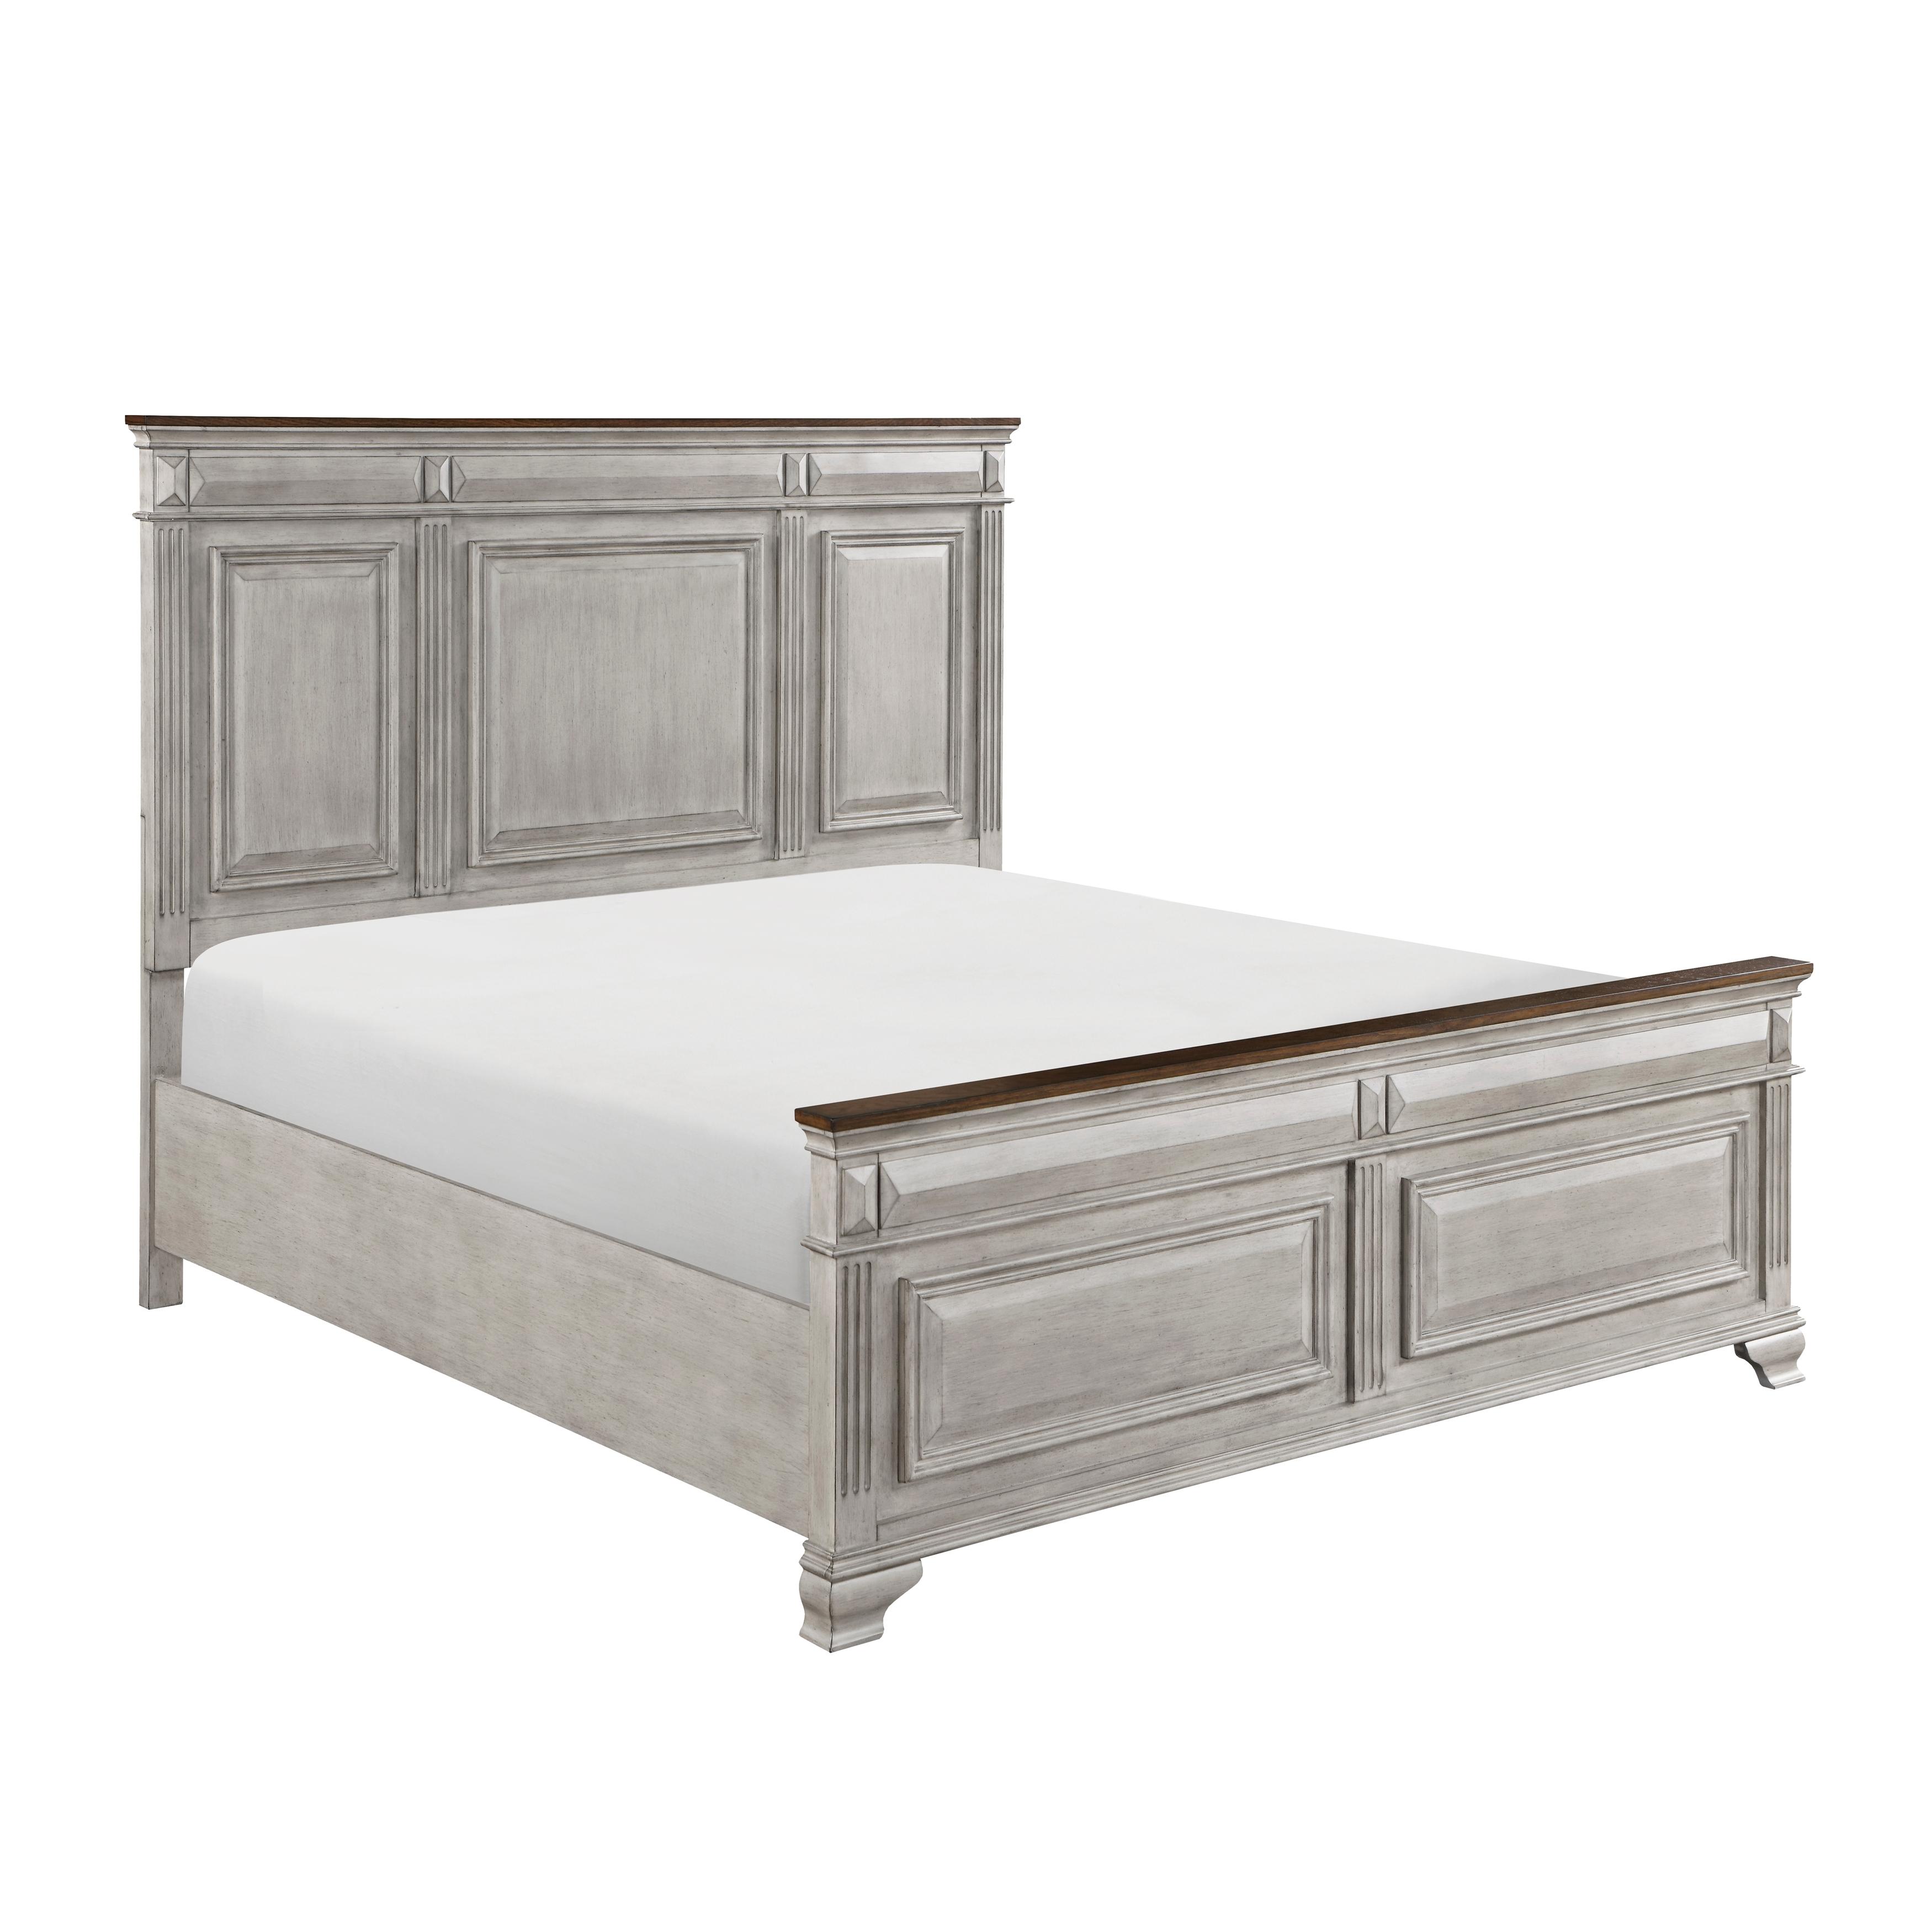 Traditional Panel Bed Marquette Queen Bed 1449-1-Q 1449-1-Q in Gray, Brown 